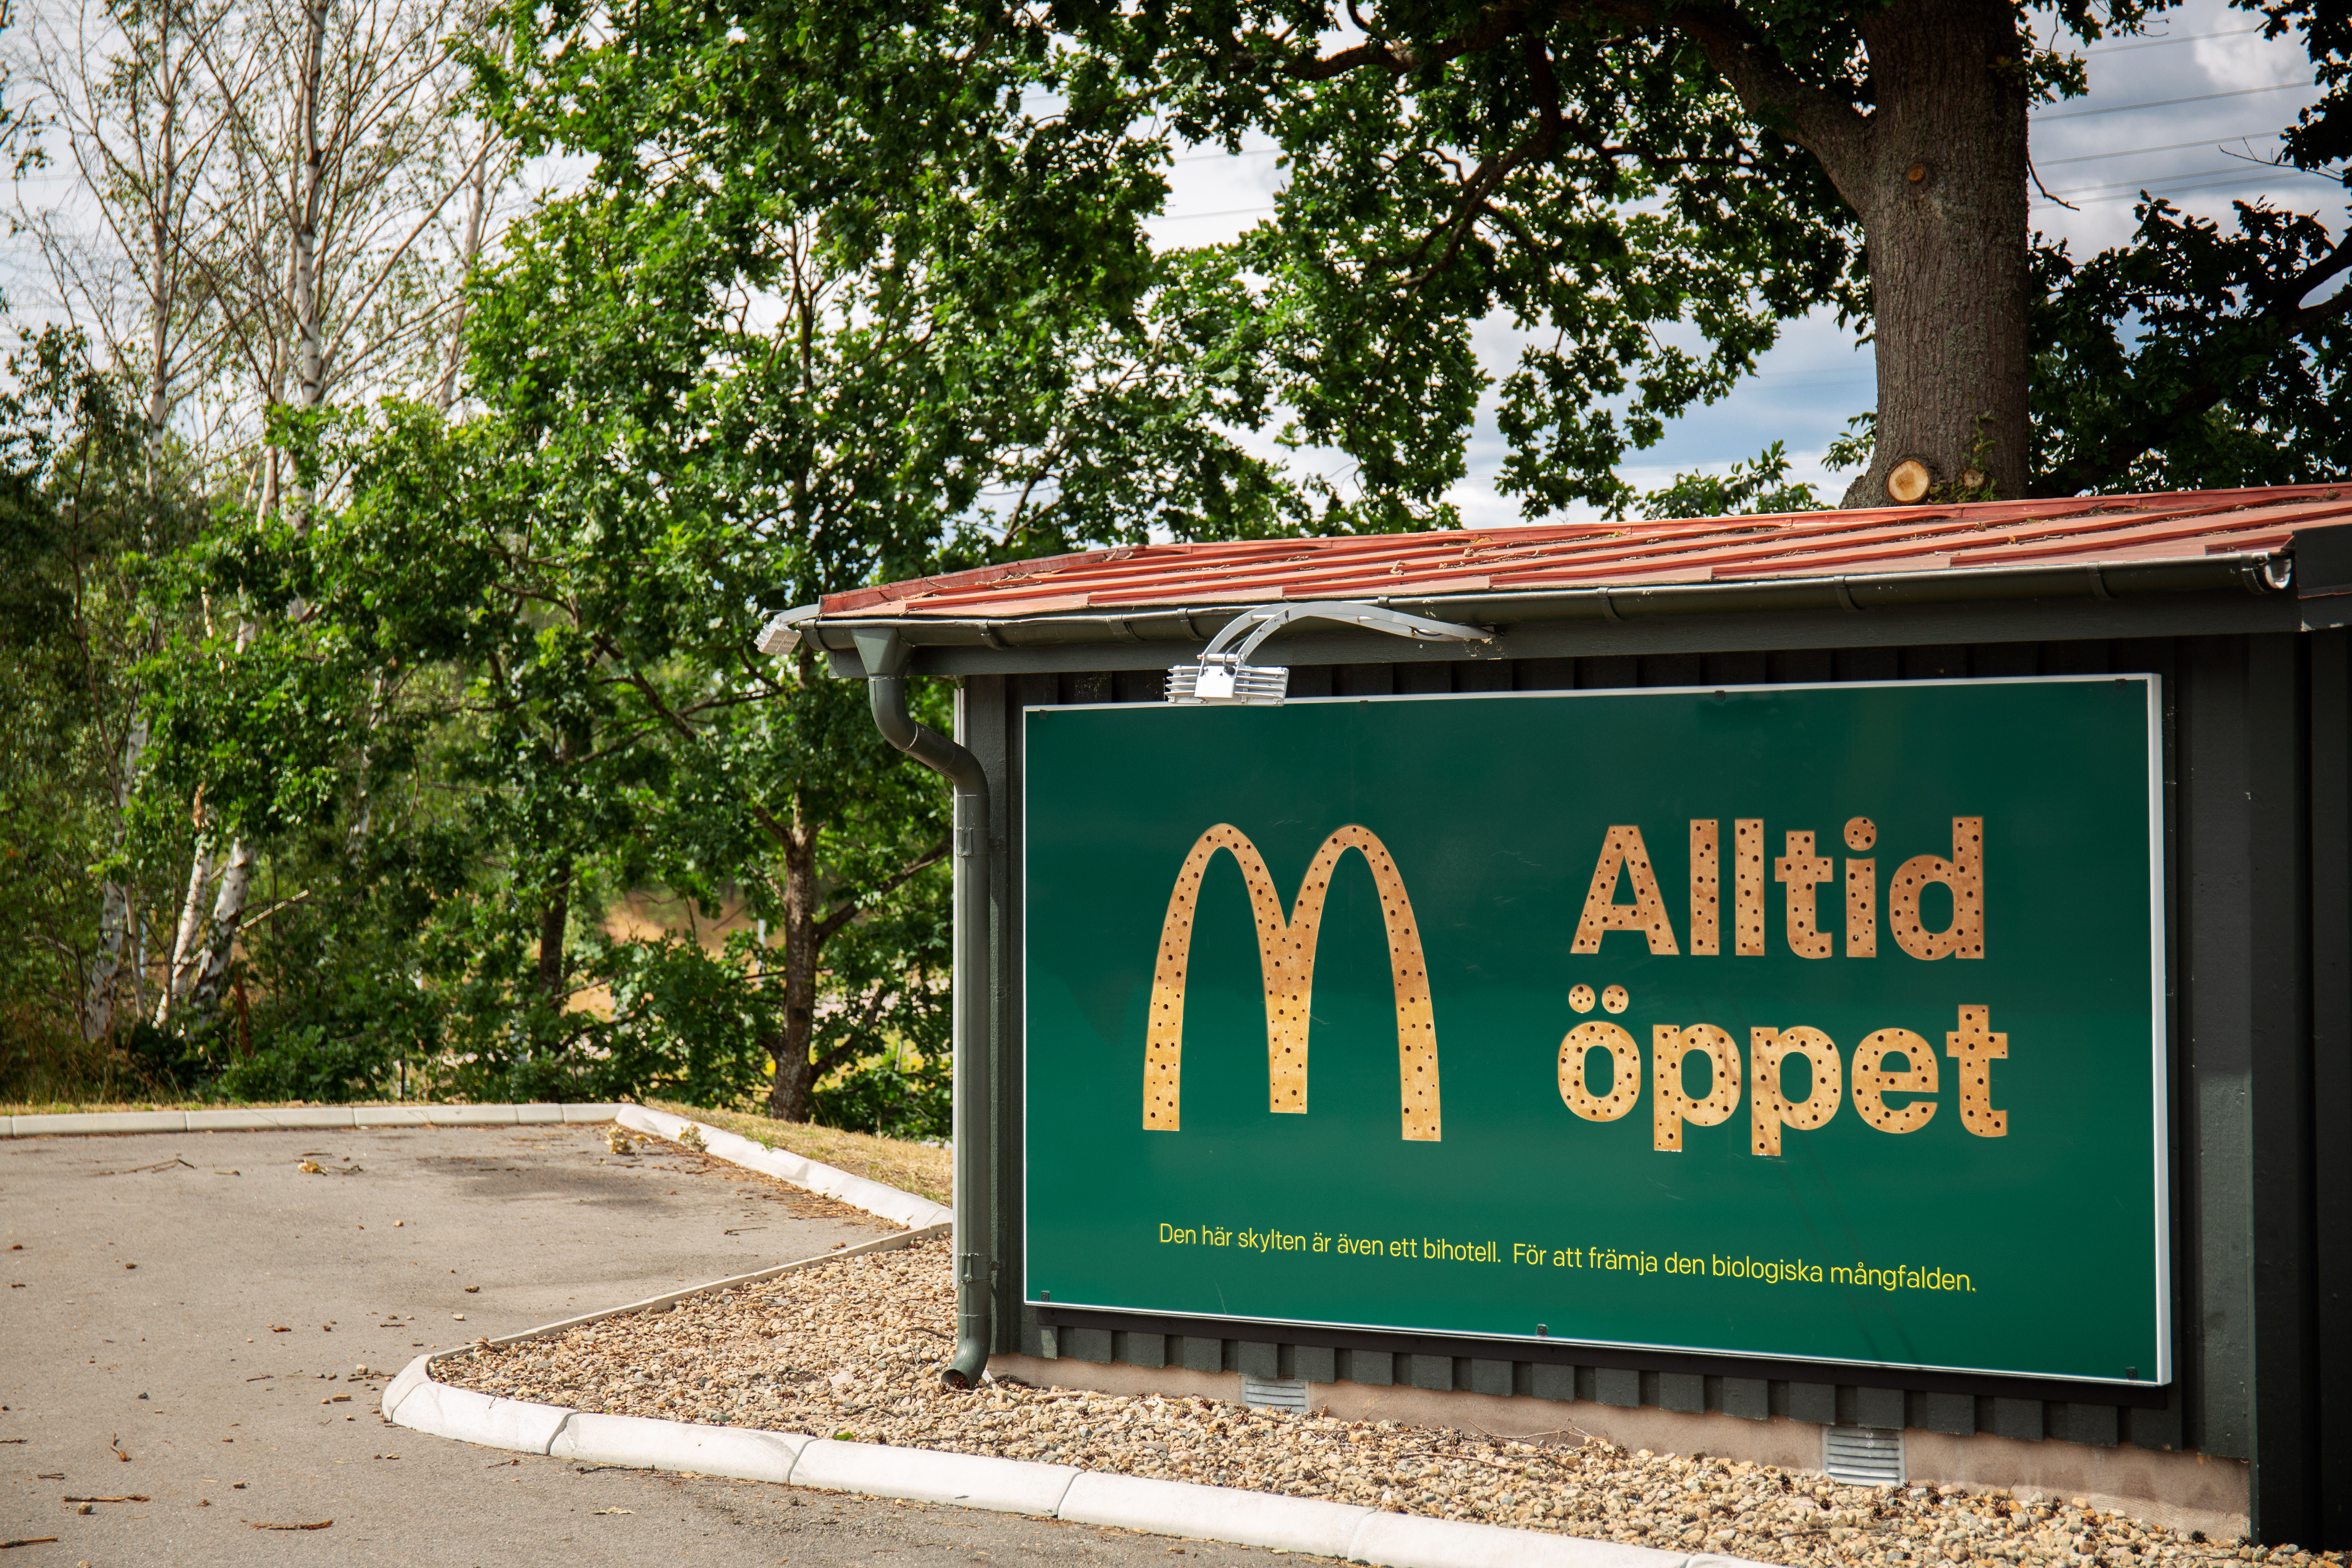 Nord DDB Helps McDonald's Use Outdoor Advertising Space to Build Habitats for Wild Bees